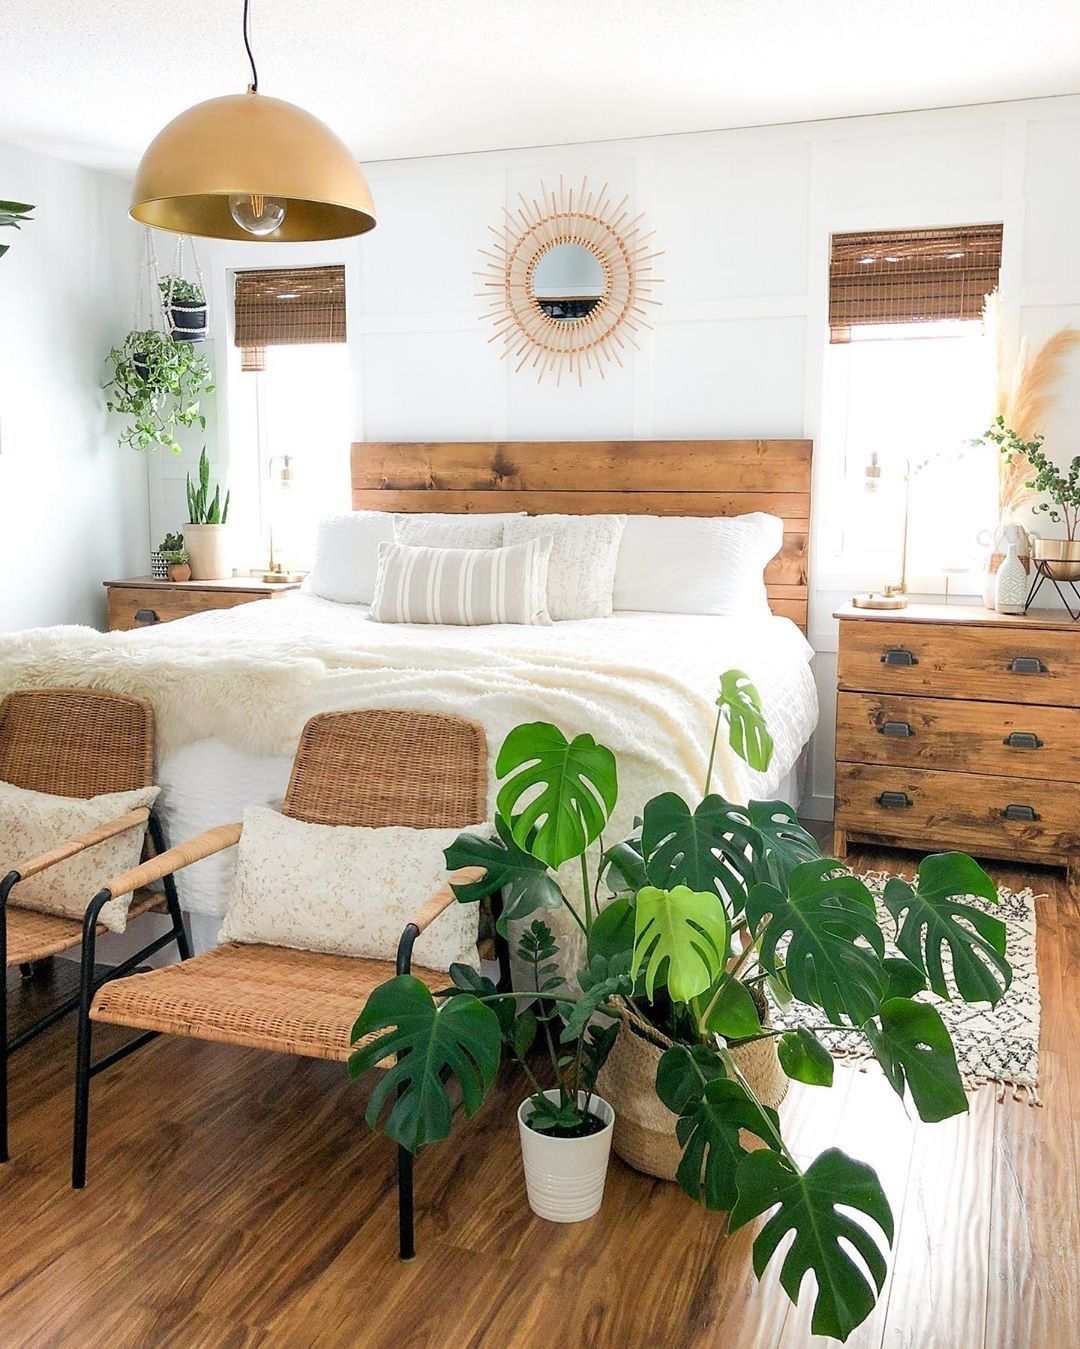 Boho Bedroom with Plants | Bohemian home decor | Tropical bedrooms